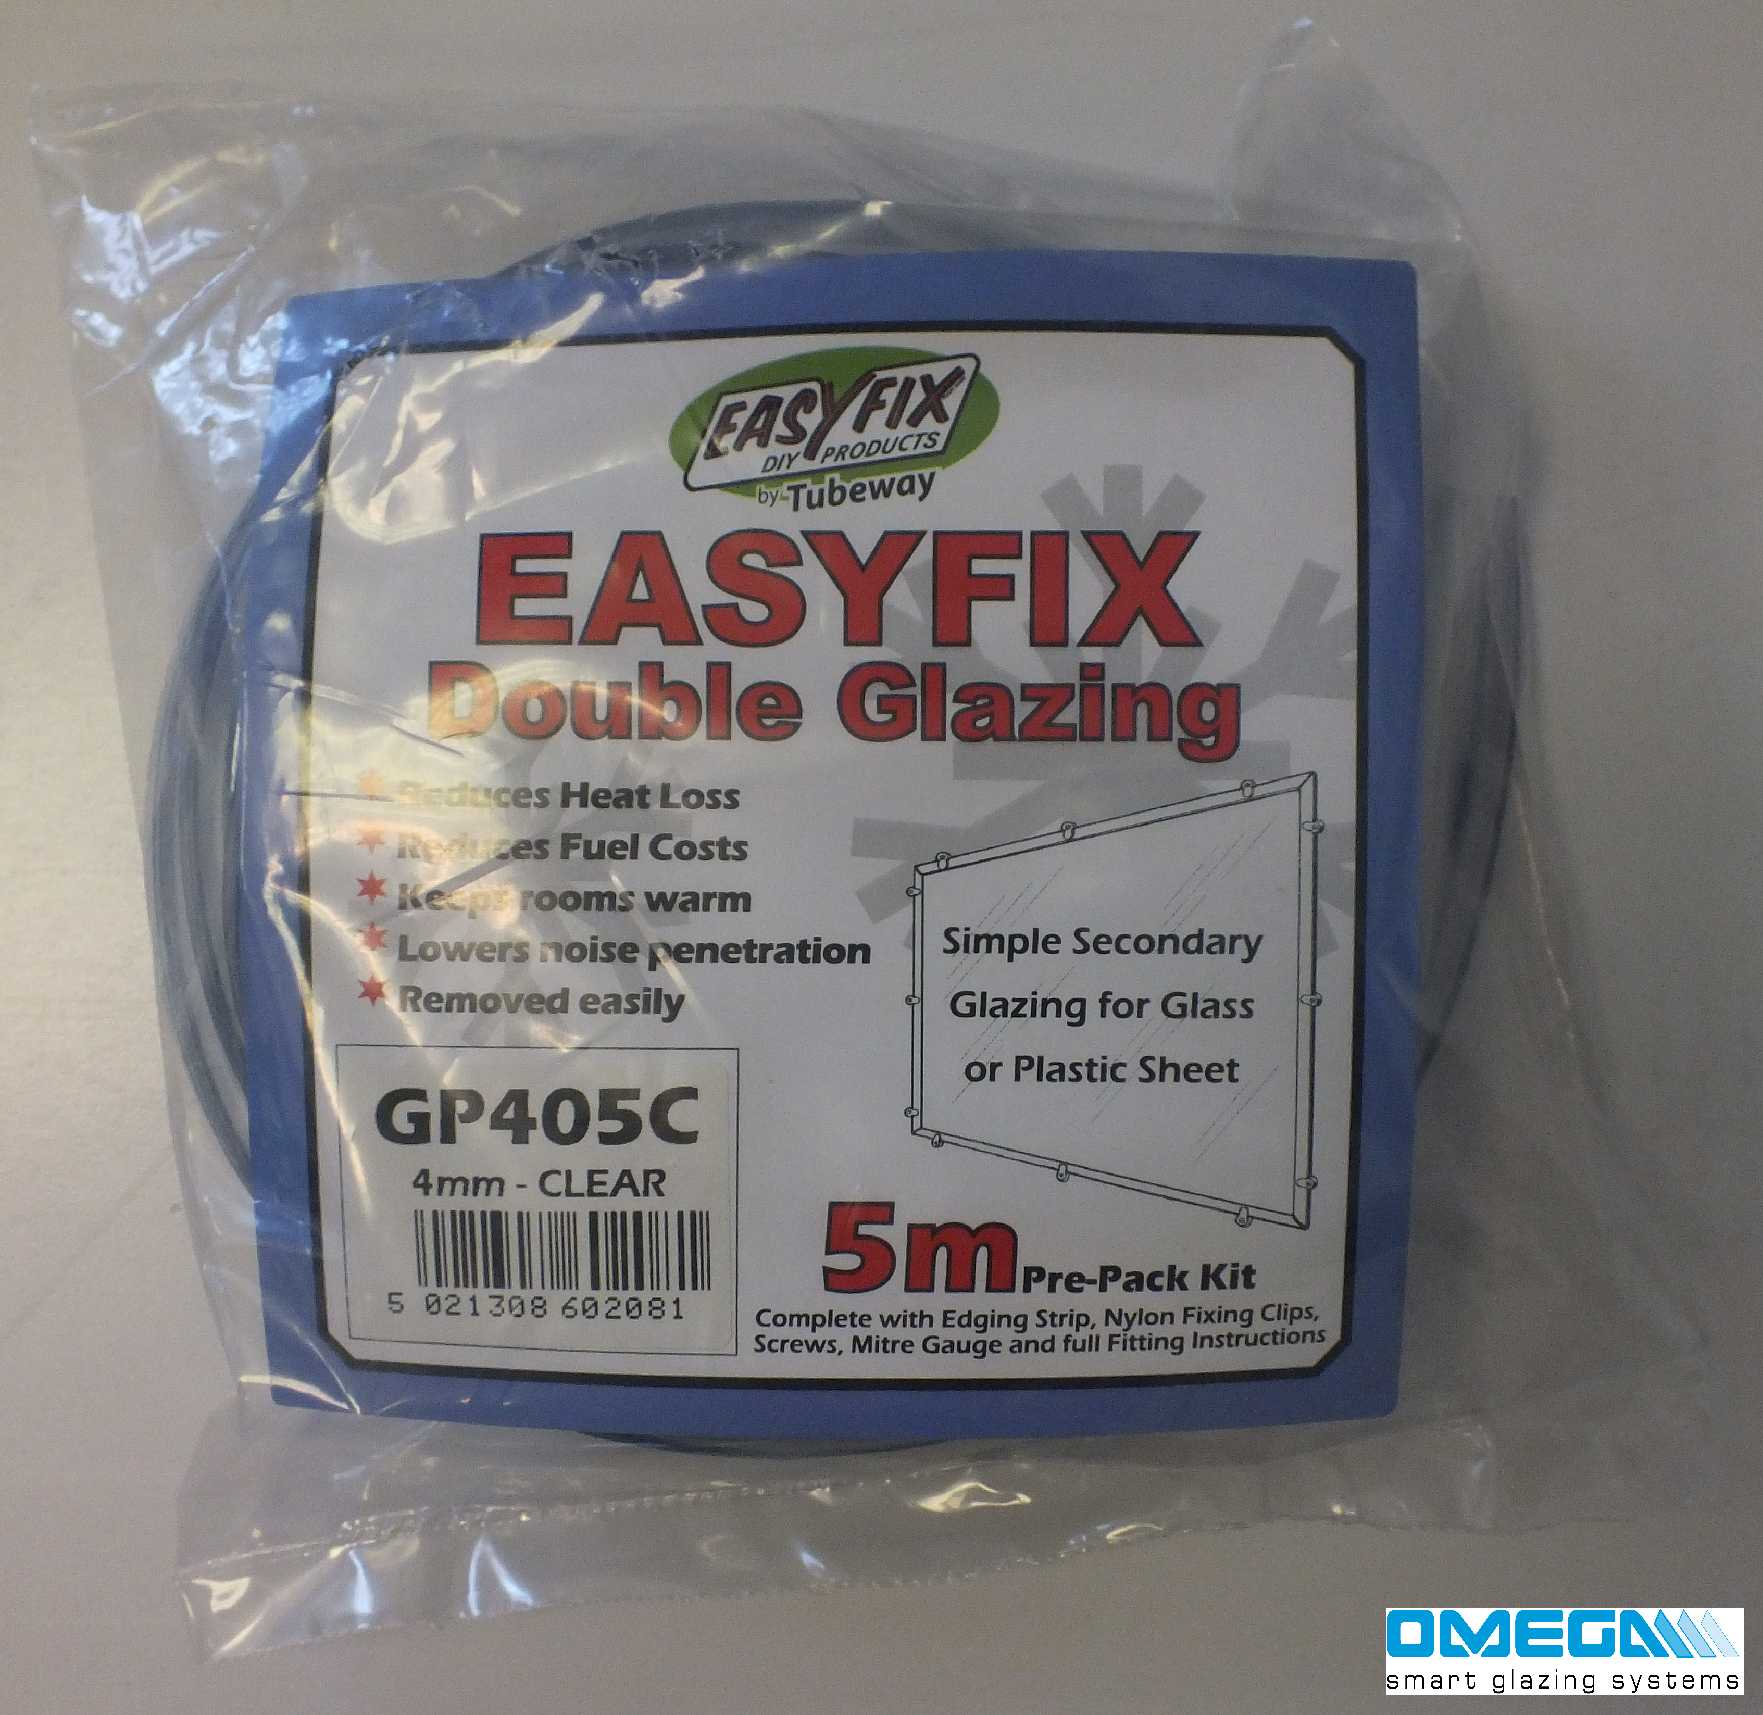 Buy Easyfix Clipglaze Edging Kit - 5m roll of edging for 4mm Glazing Thickness, White, Clear or Brown online today